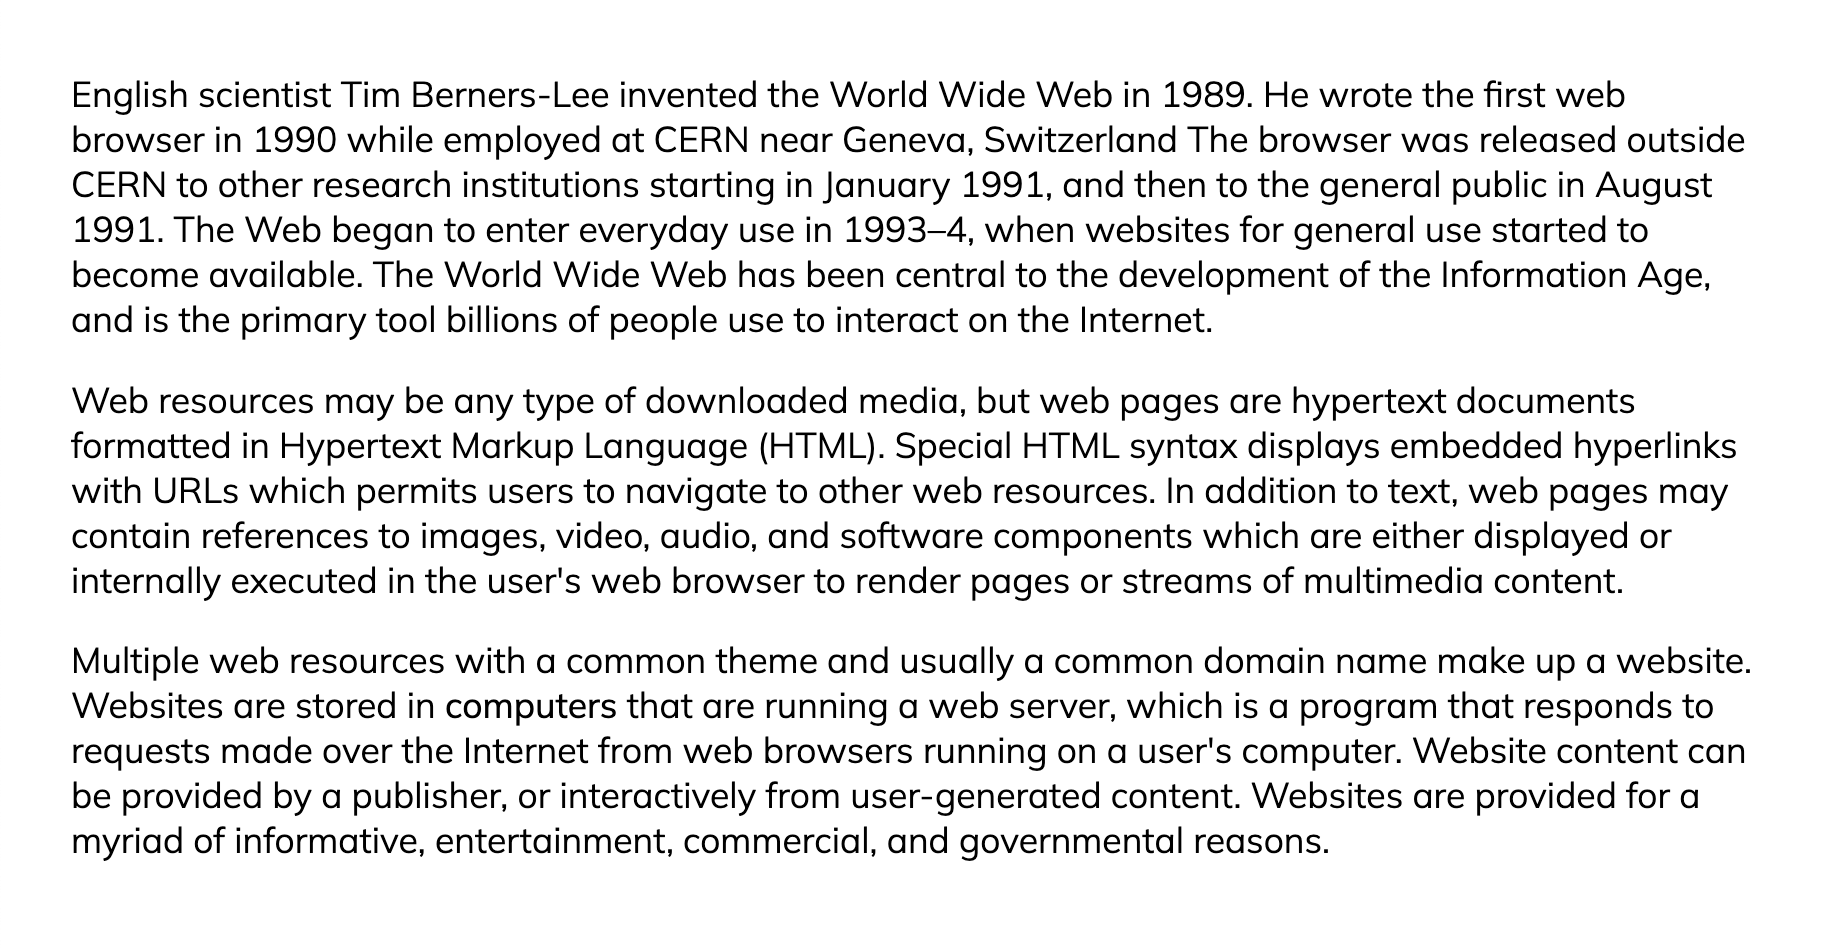 Three paragraphs of text about English scientist Tim Berners-Lee. All of the text appears to be the same font weight.